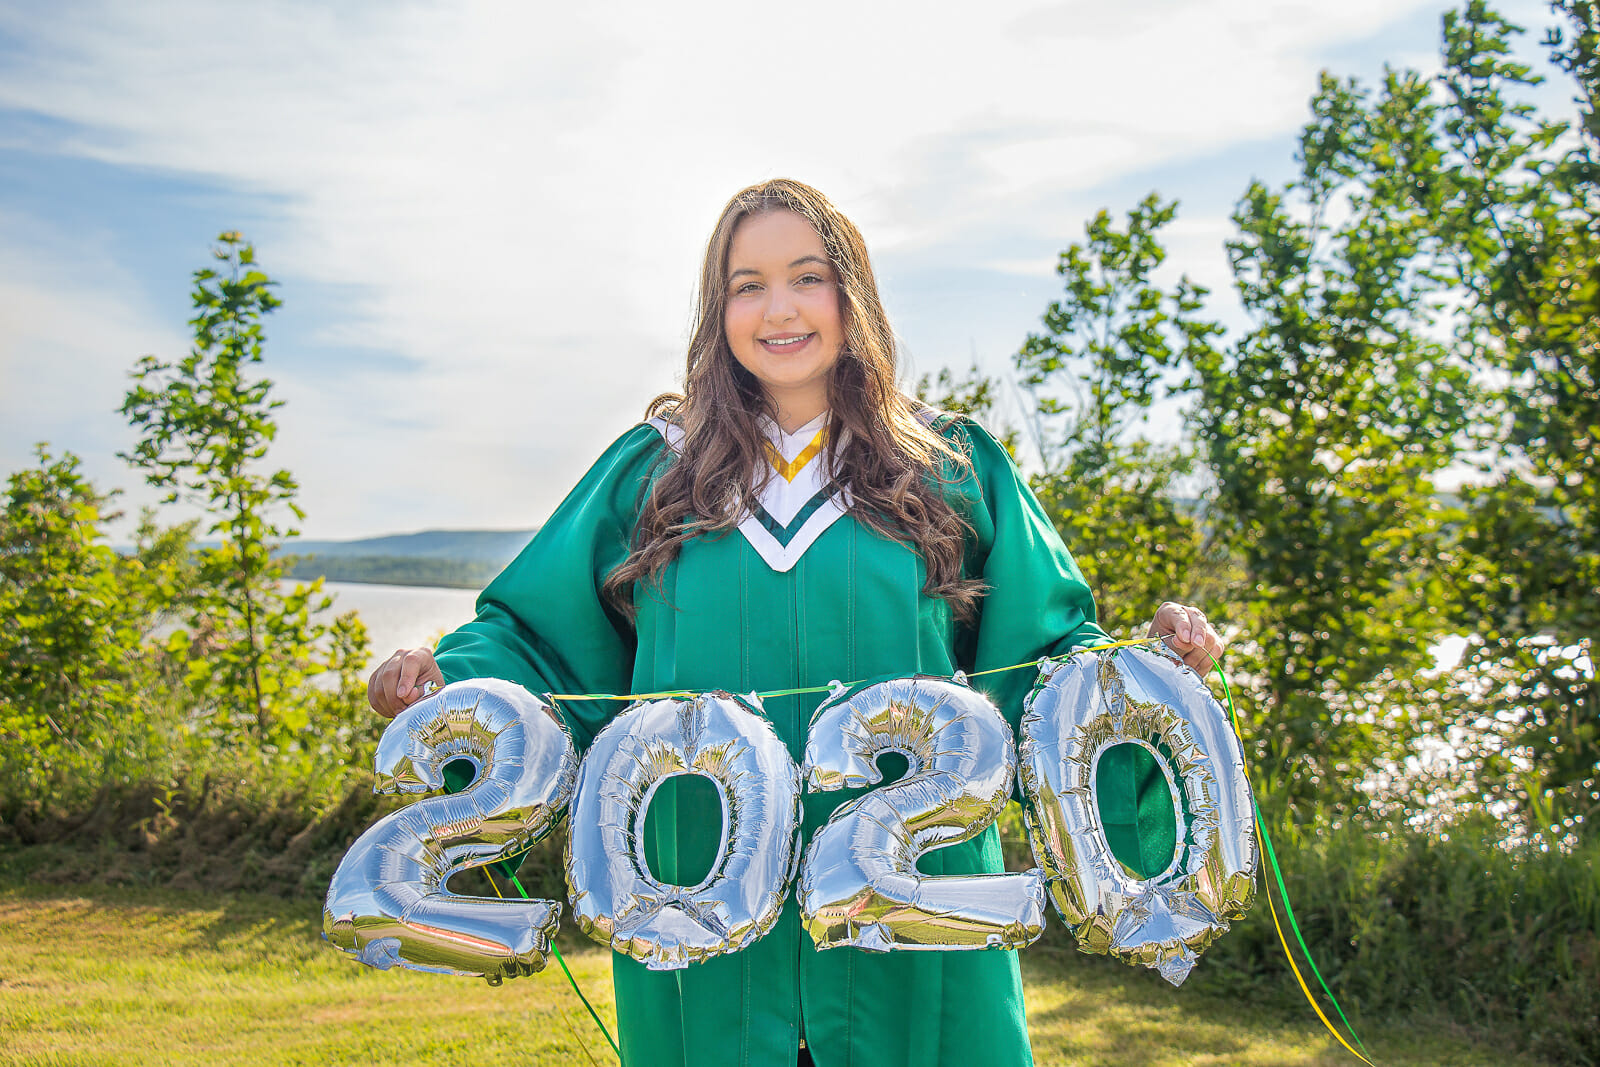 A photo from the Patterson Graduation Photoshoot, shot in Annapolis Royal, Nova Scotia at the Fort Anne on a beautiful sunny day